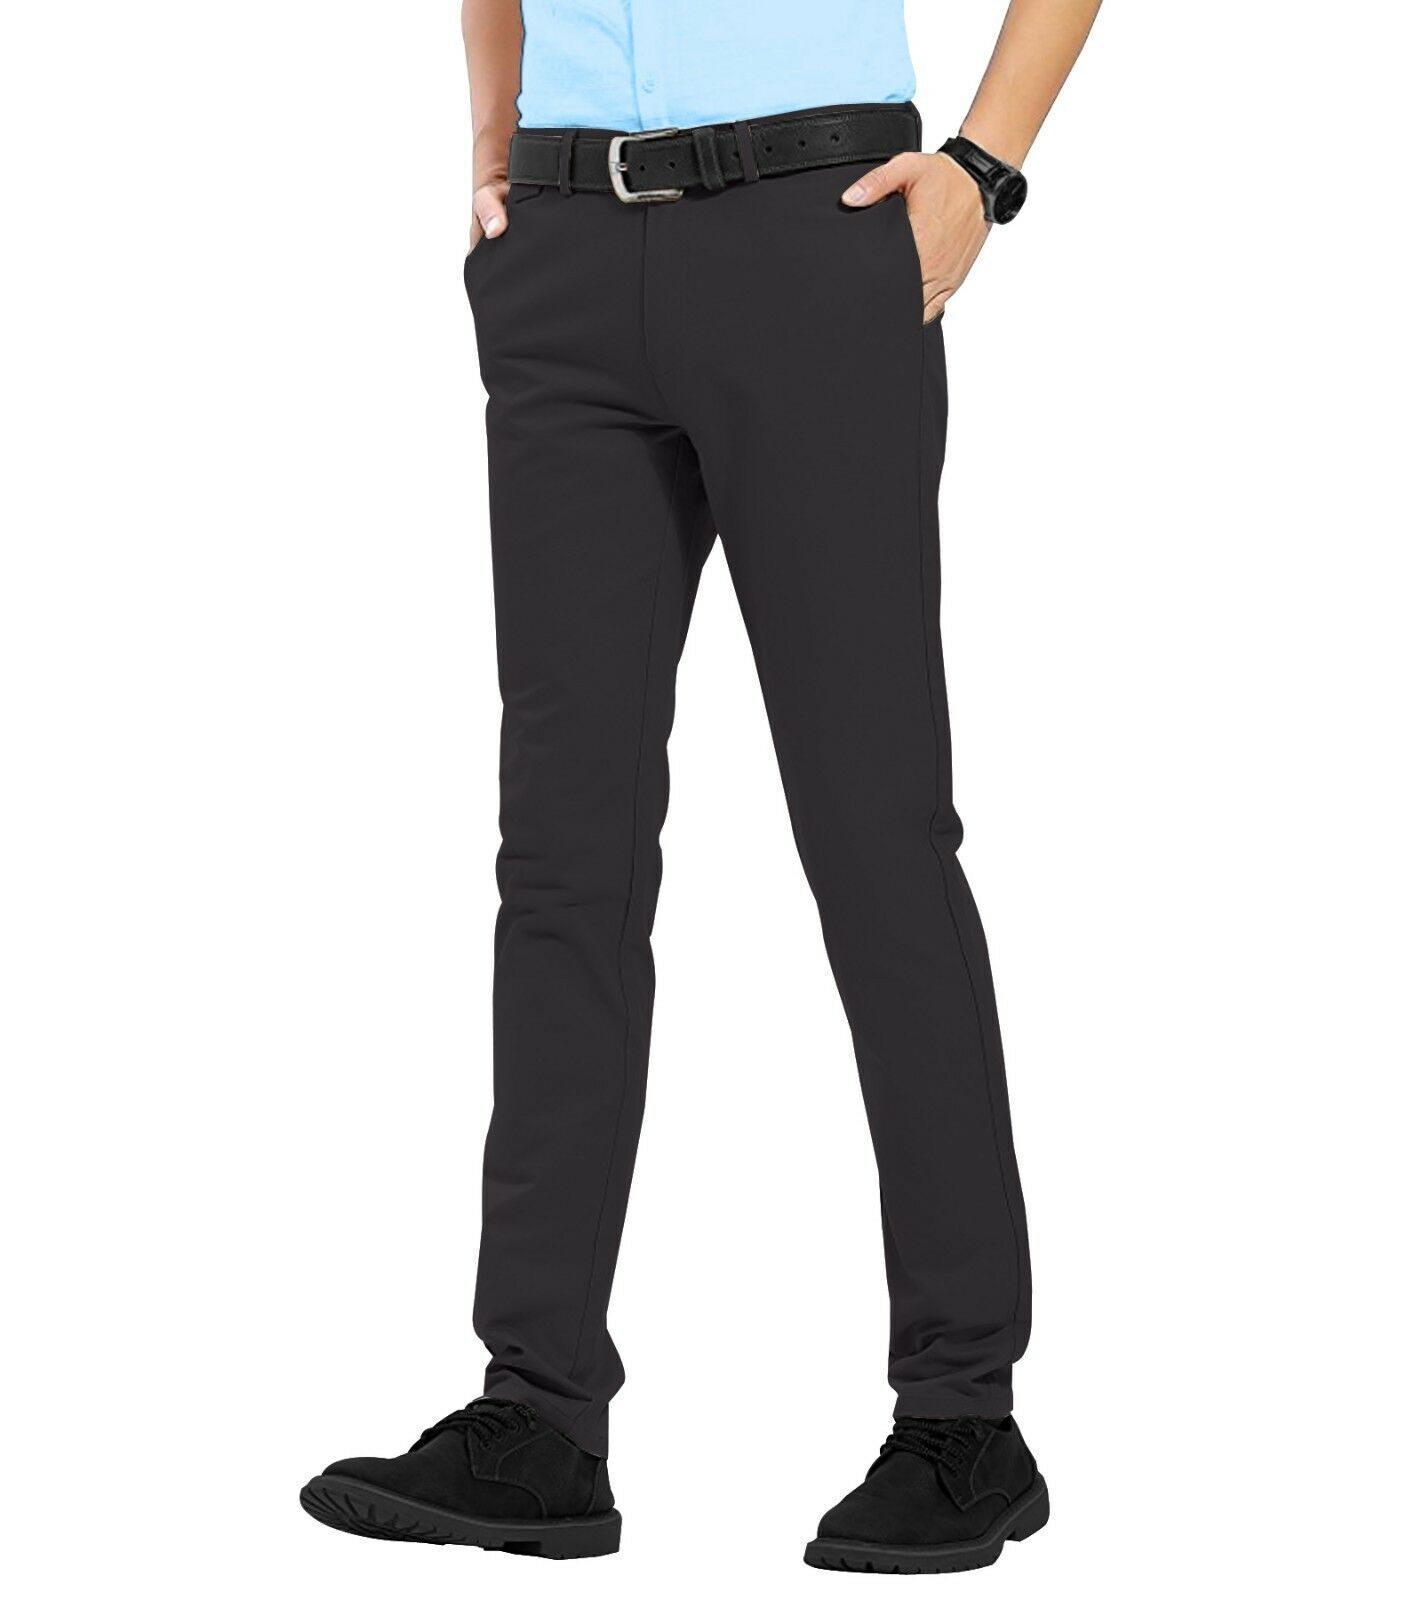 Mens Chino Trousers Slim Fit Stretch Casual Jeans westAce Cotton ...